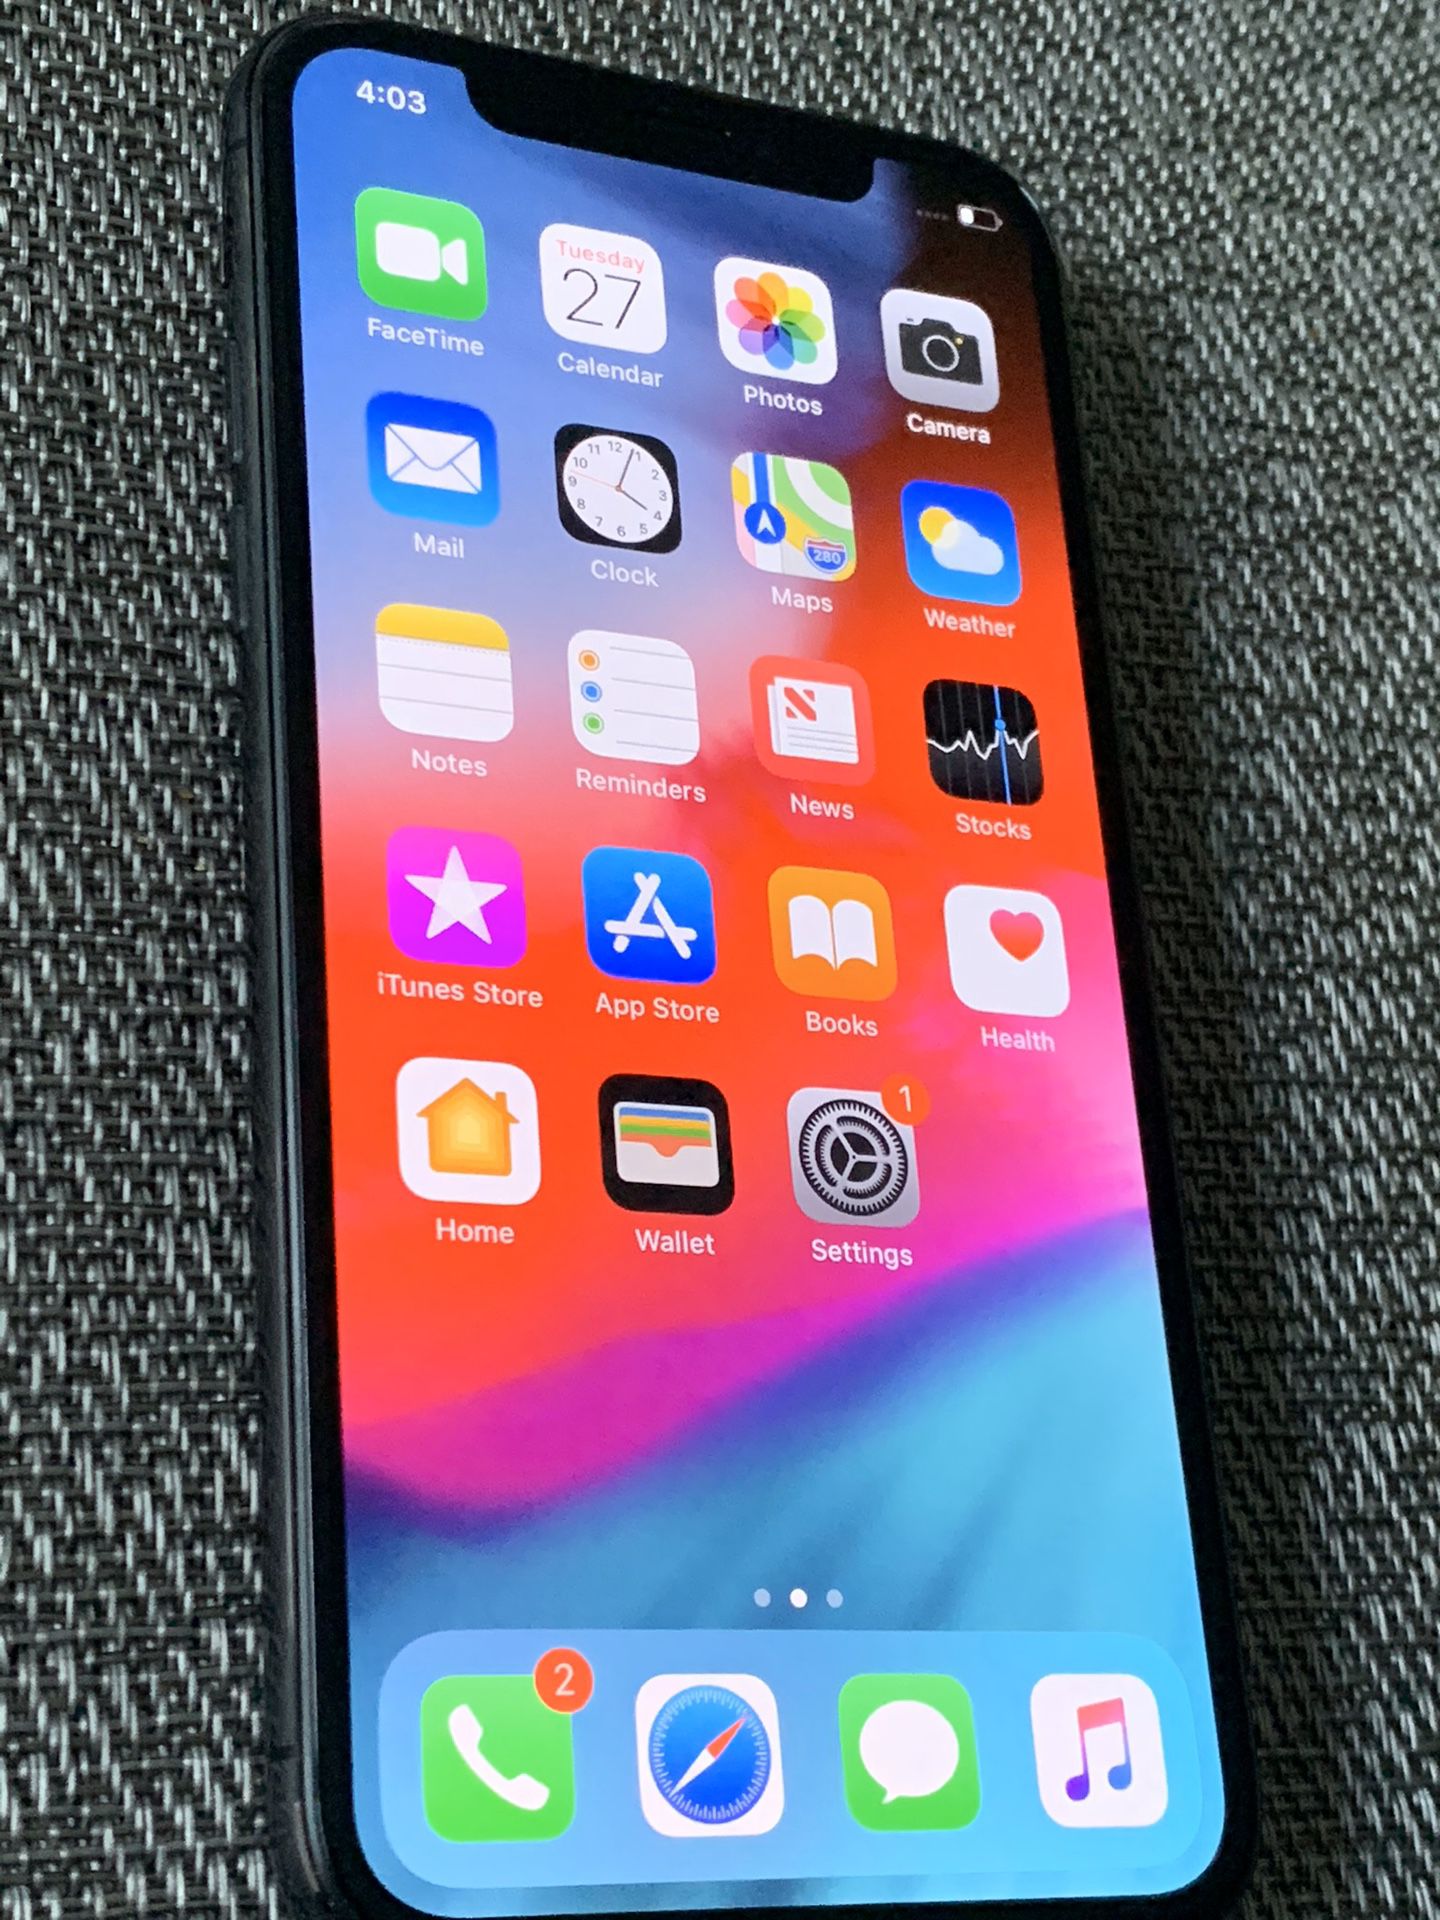 UNLOCKED IPHONE X 256GB WITH EXTRAS